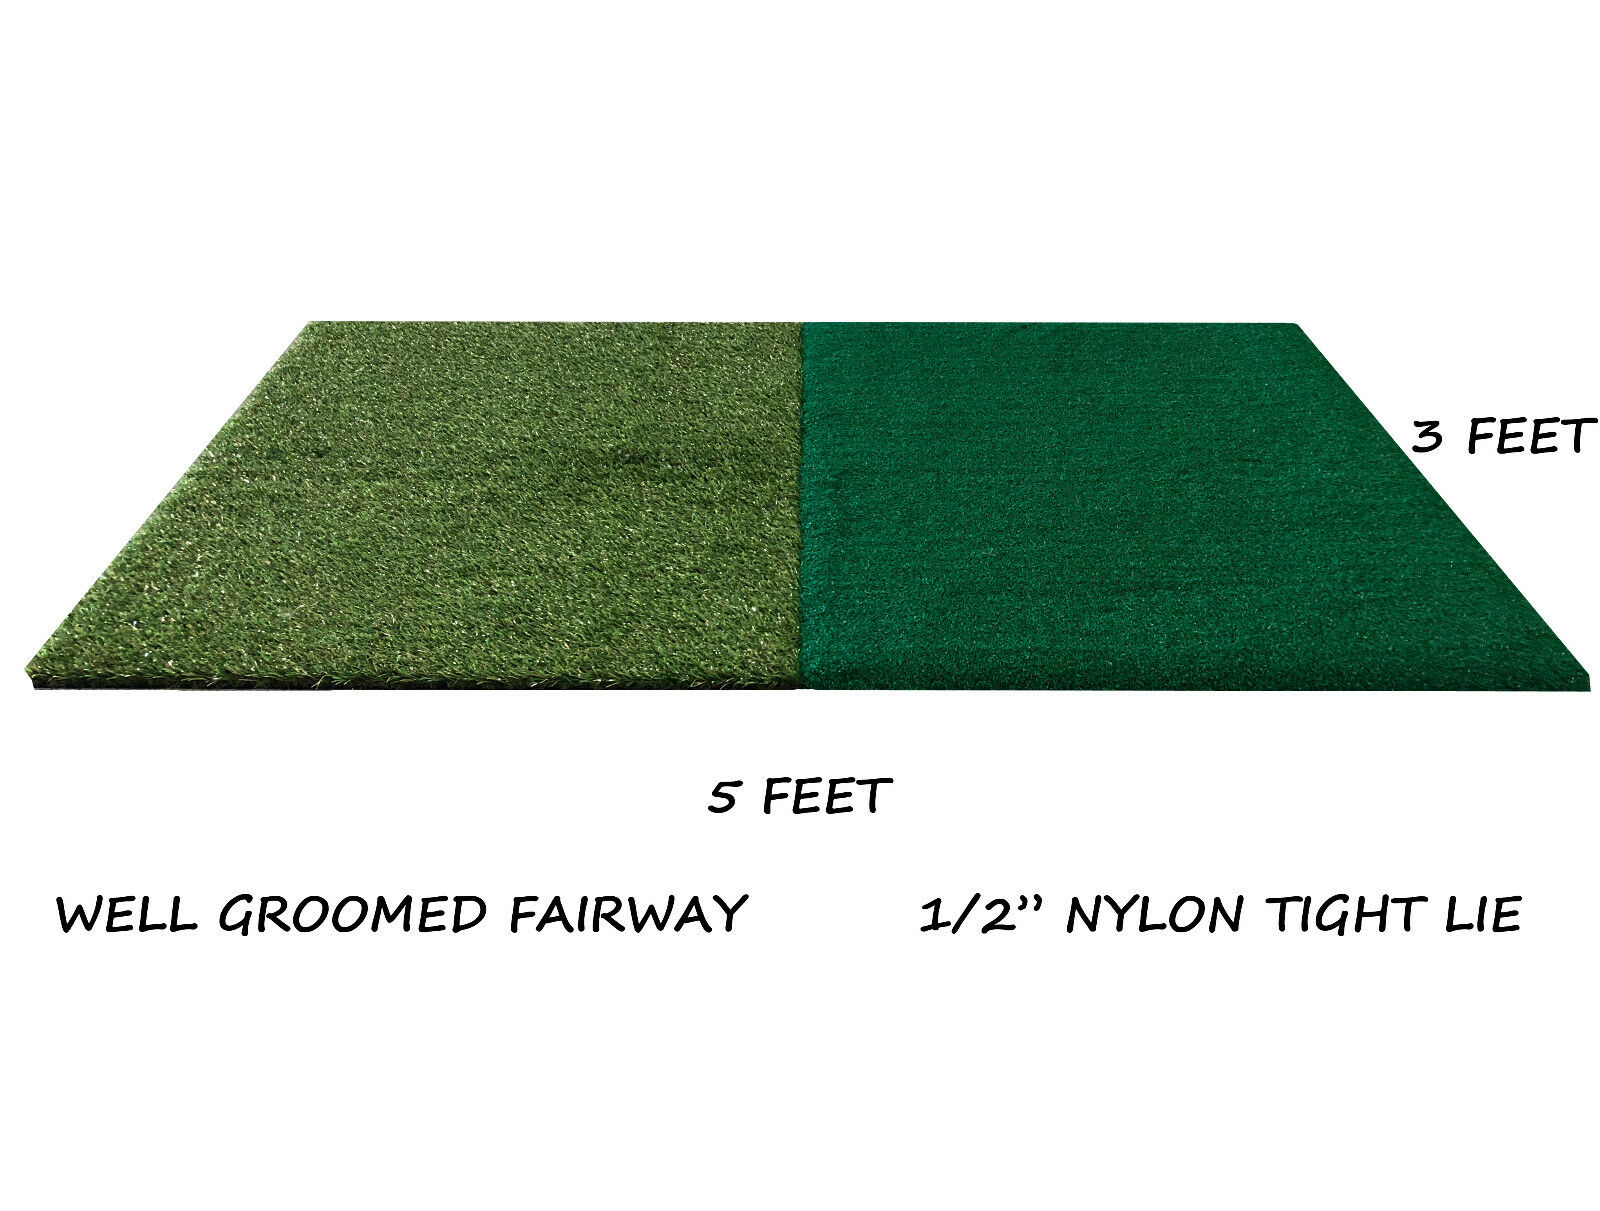 3'x5' Dual Synthetic Turf Golf Mat Chipping Fairway Driving Range Practice Mats